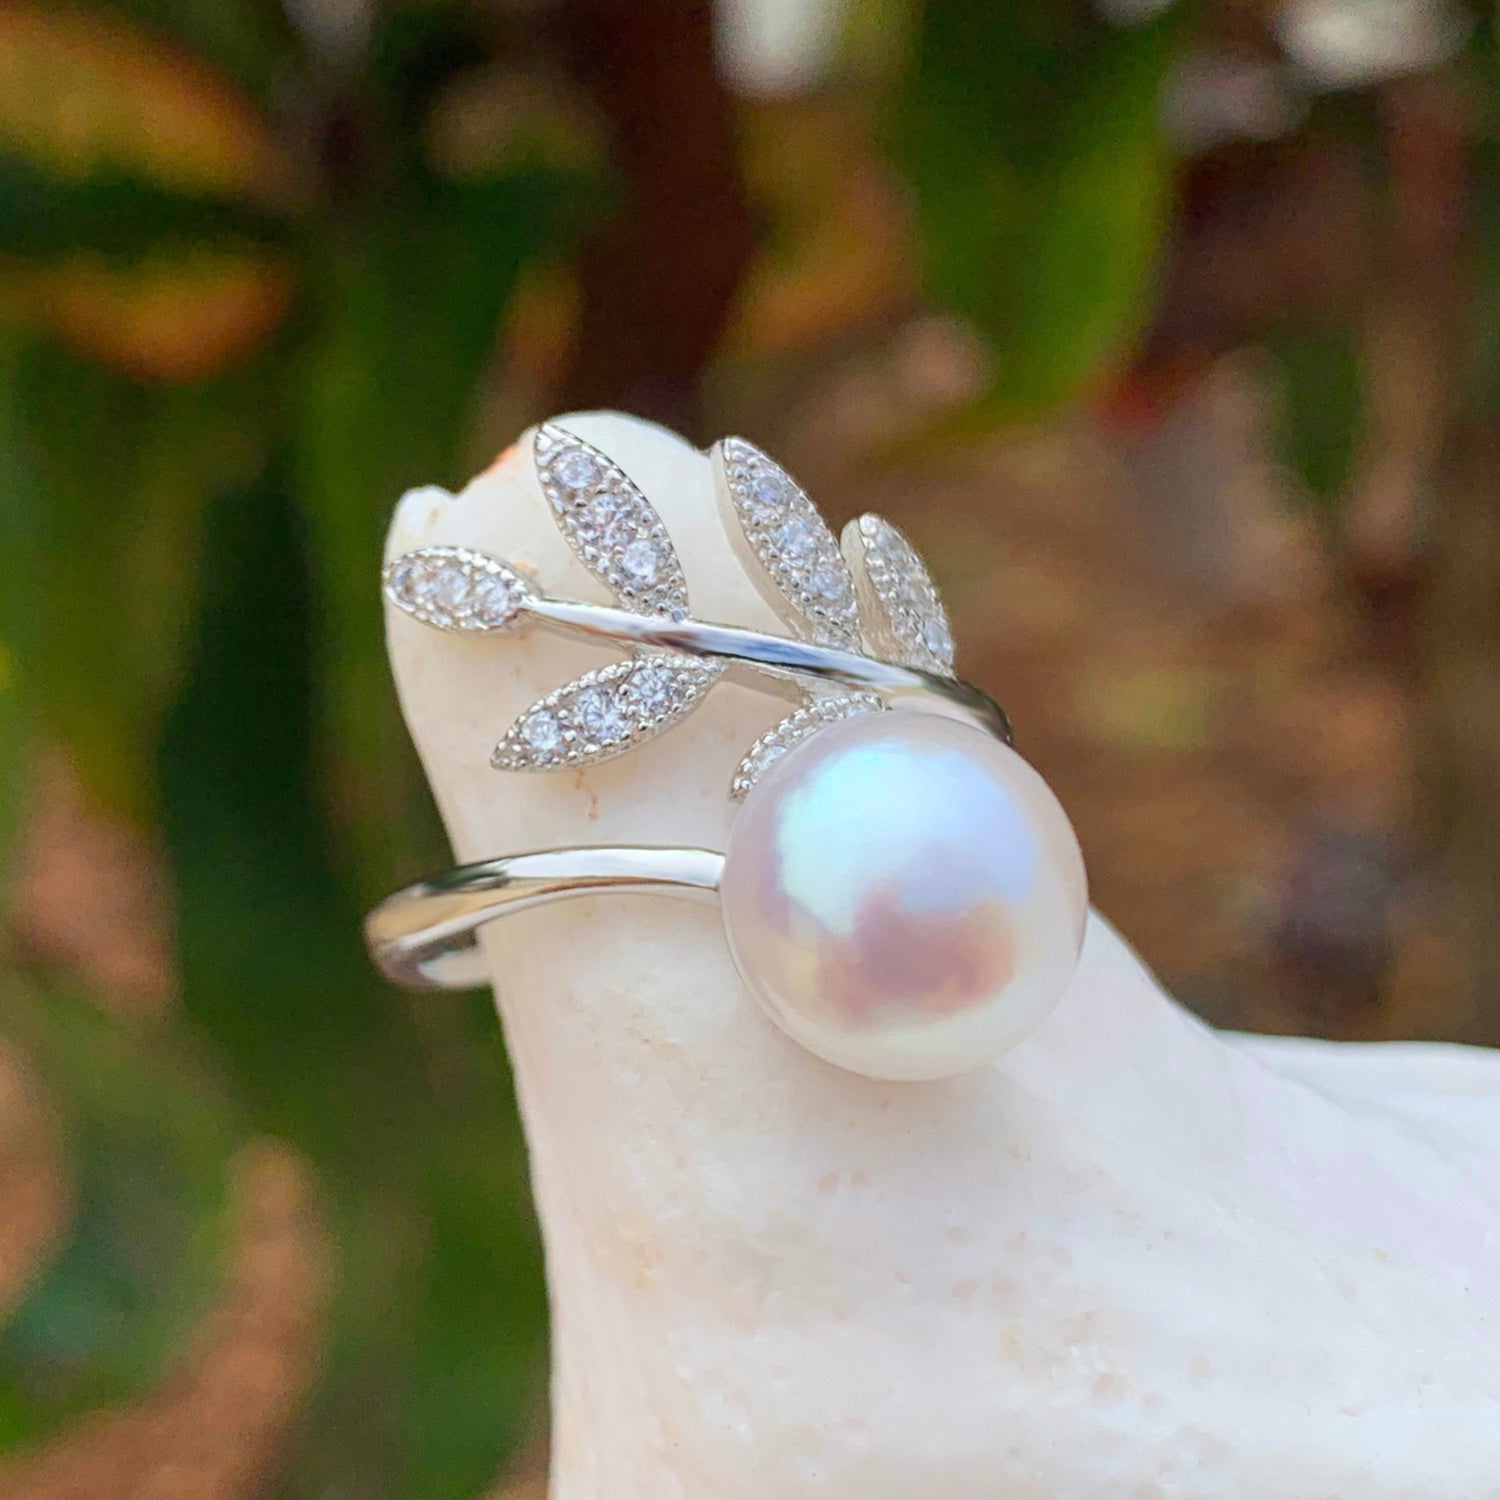 Maile Pearl Adjustable Wrap Ring